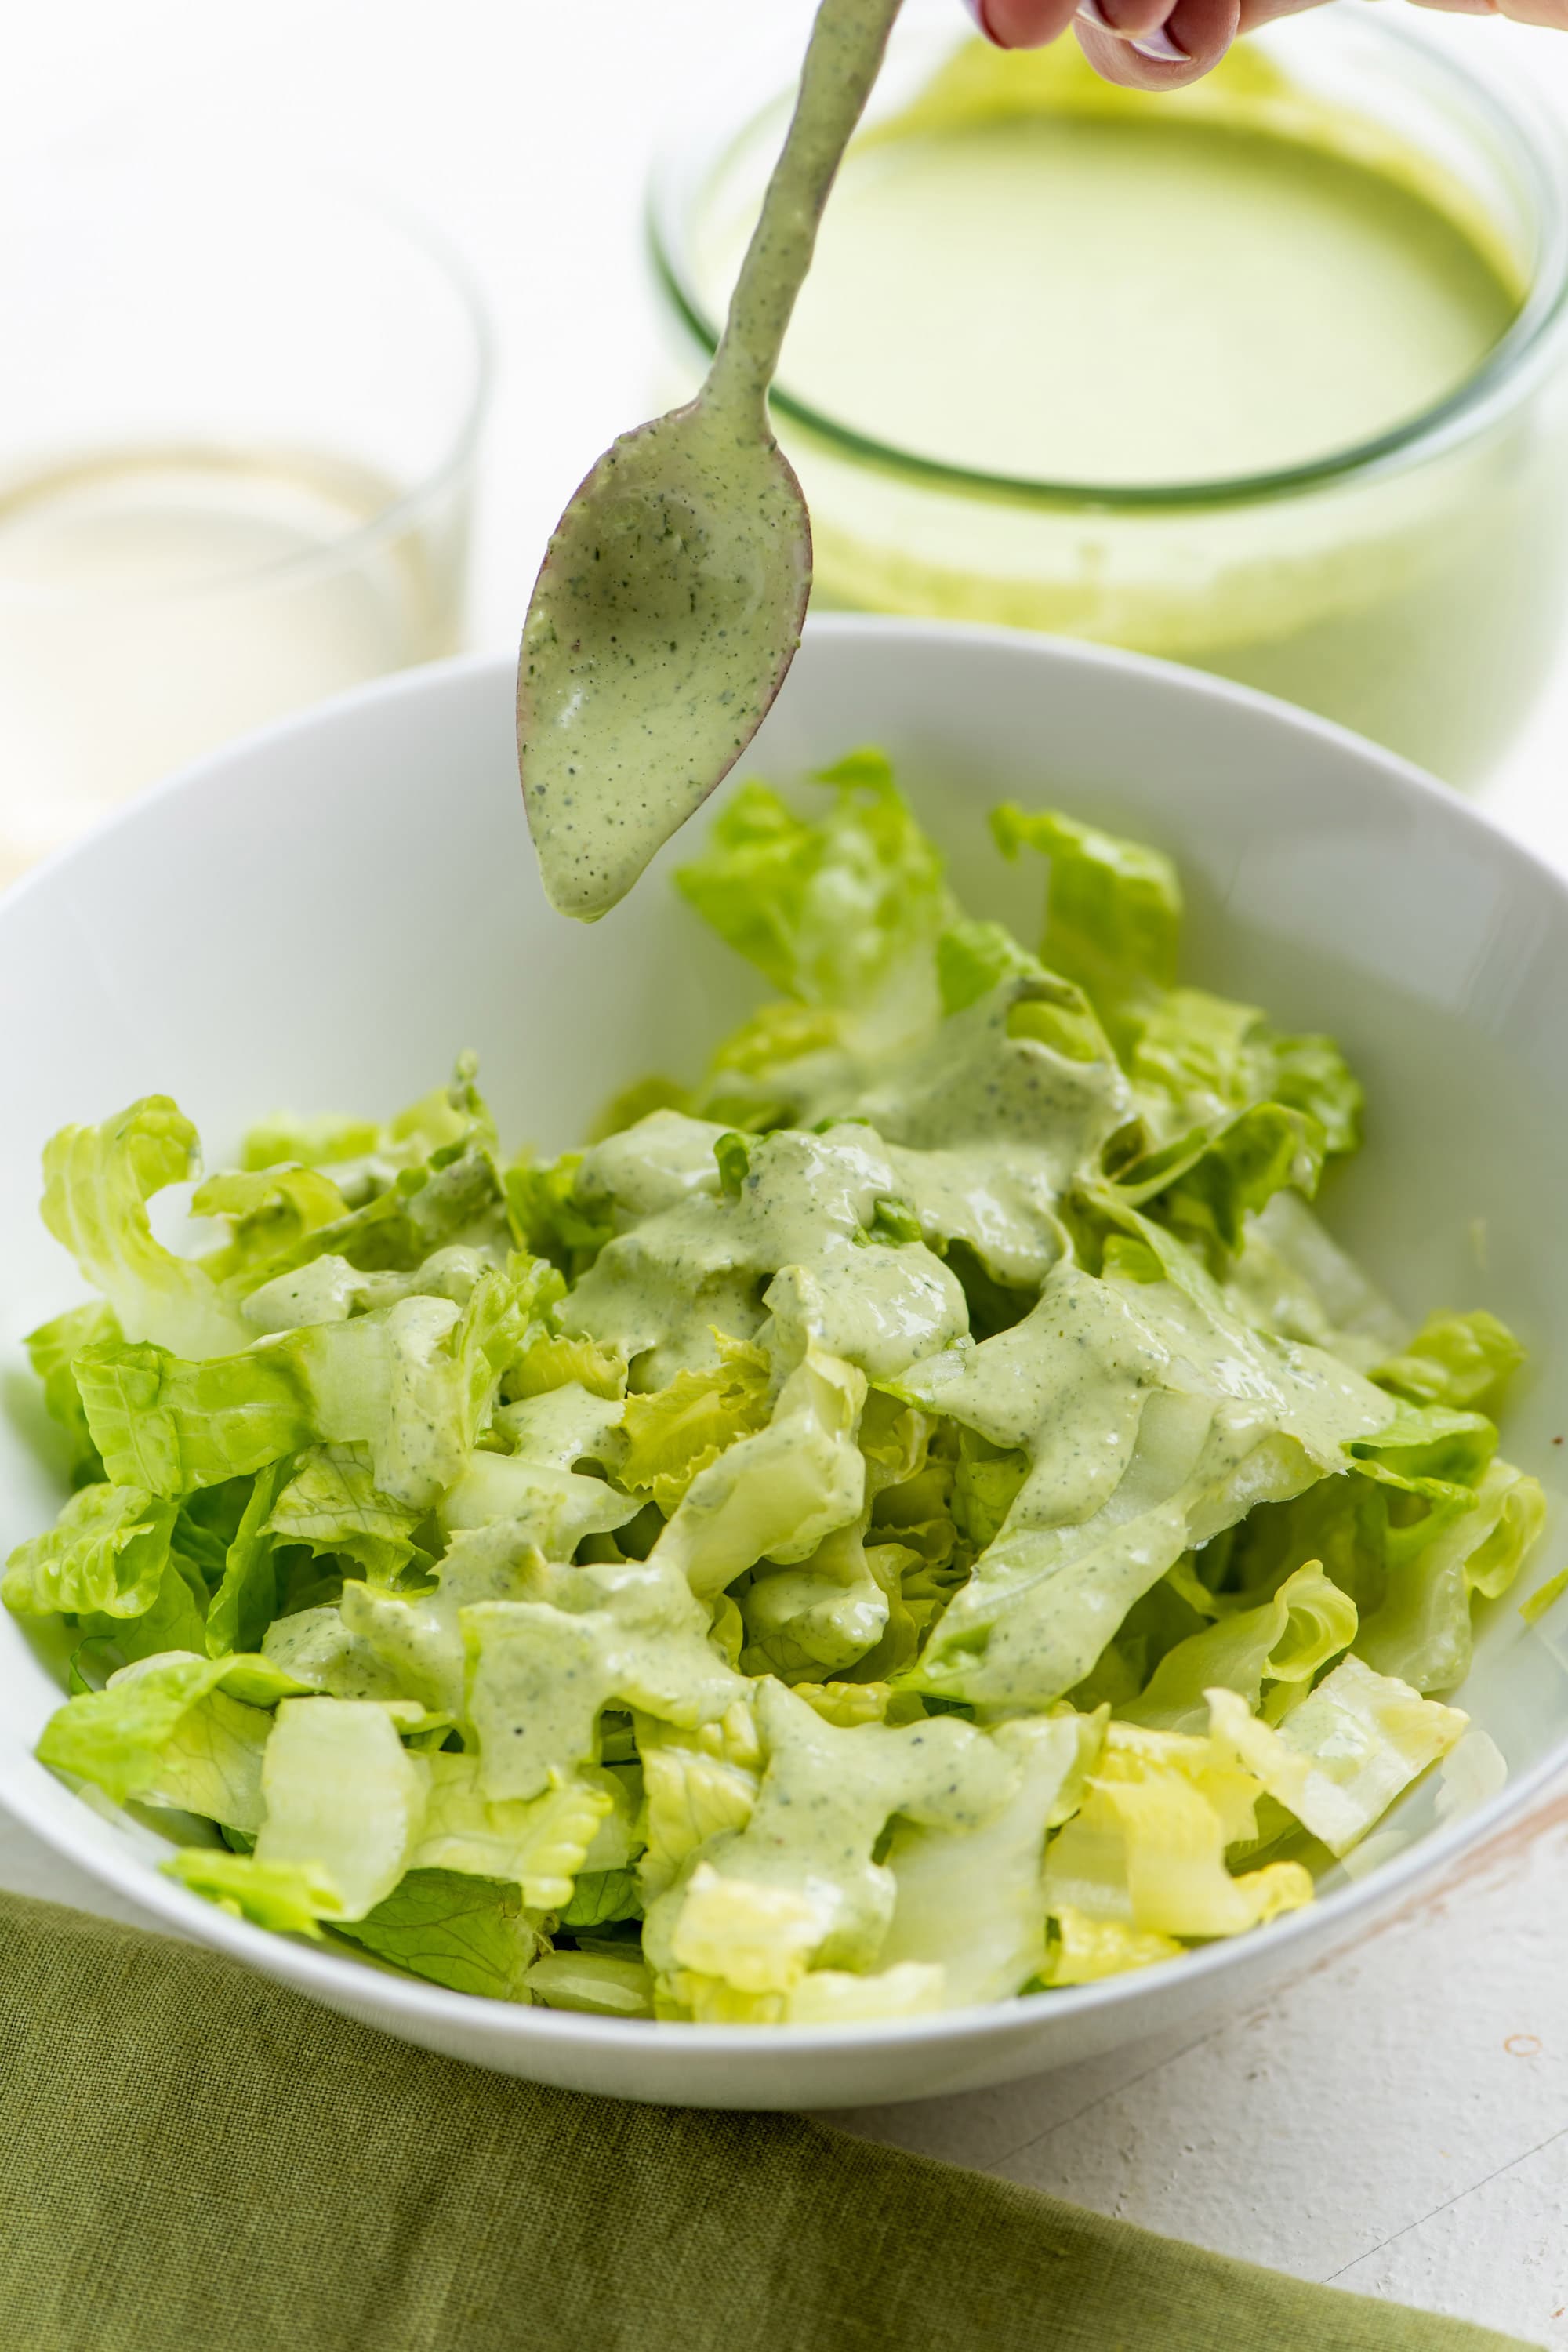 Spoon drizzling Green Goddess Dressing over a green salad.